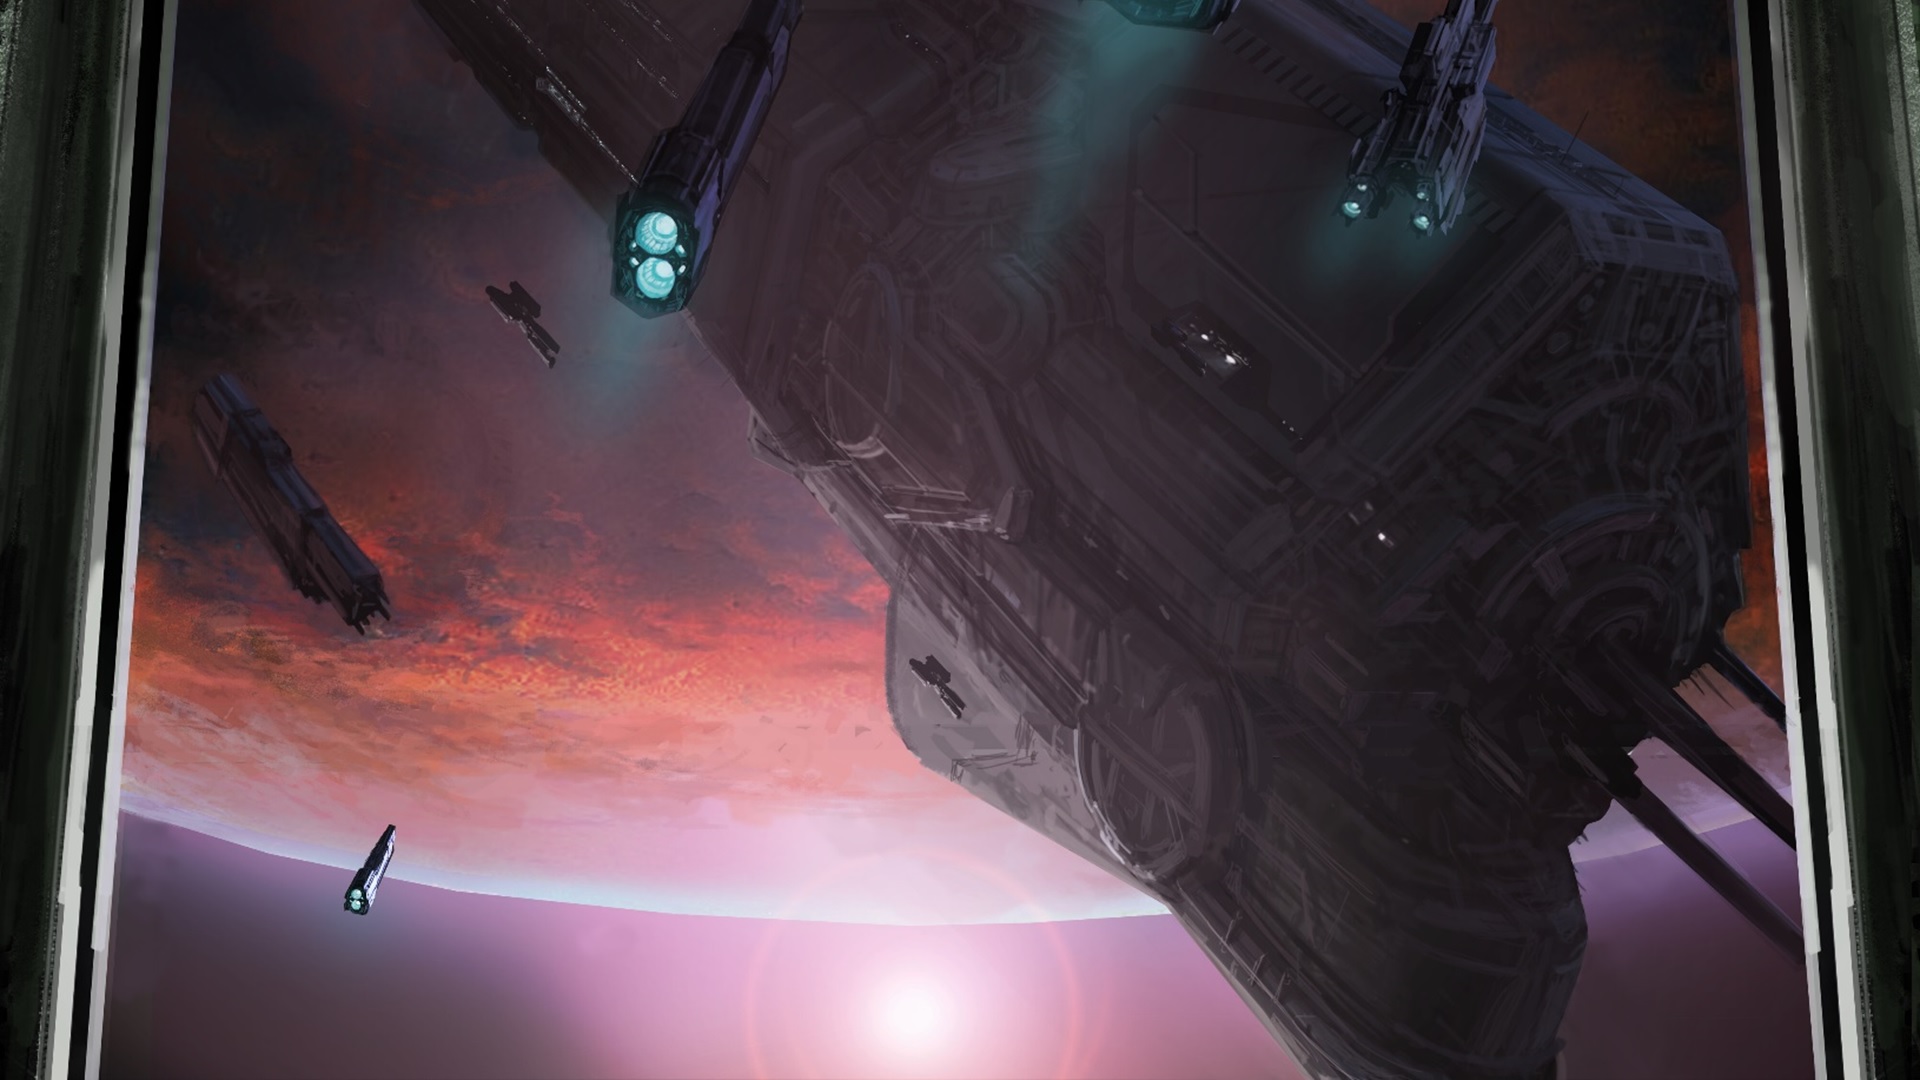 Crop of Eddie Smith's cover art for Halo: The Thursday War depicting the UNSC Infinity at Sanghelios